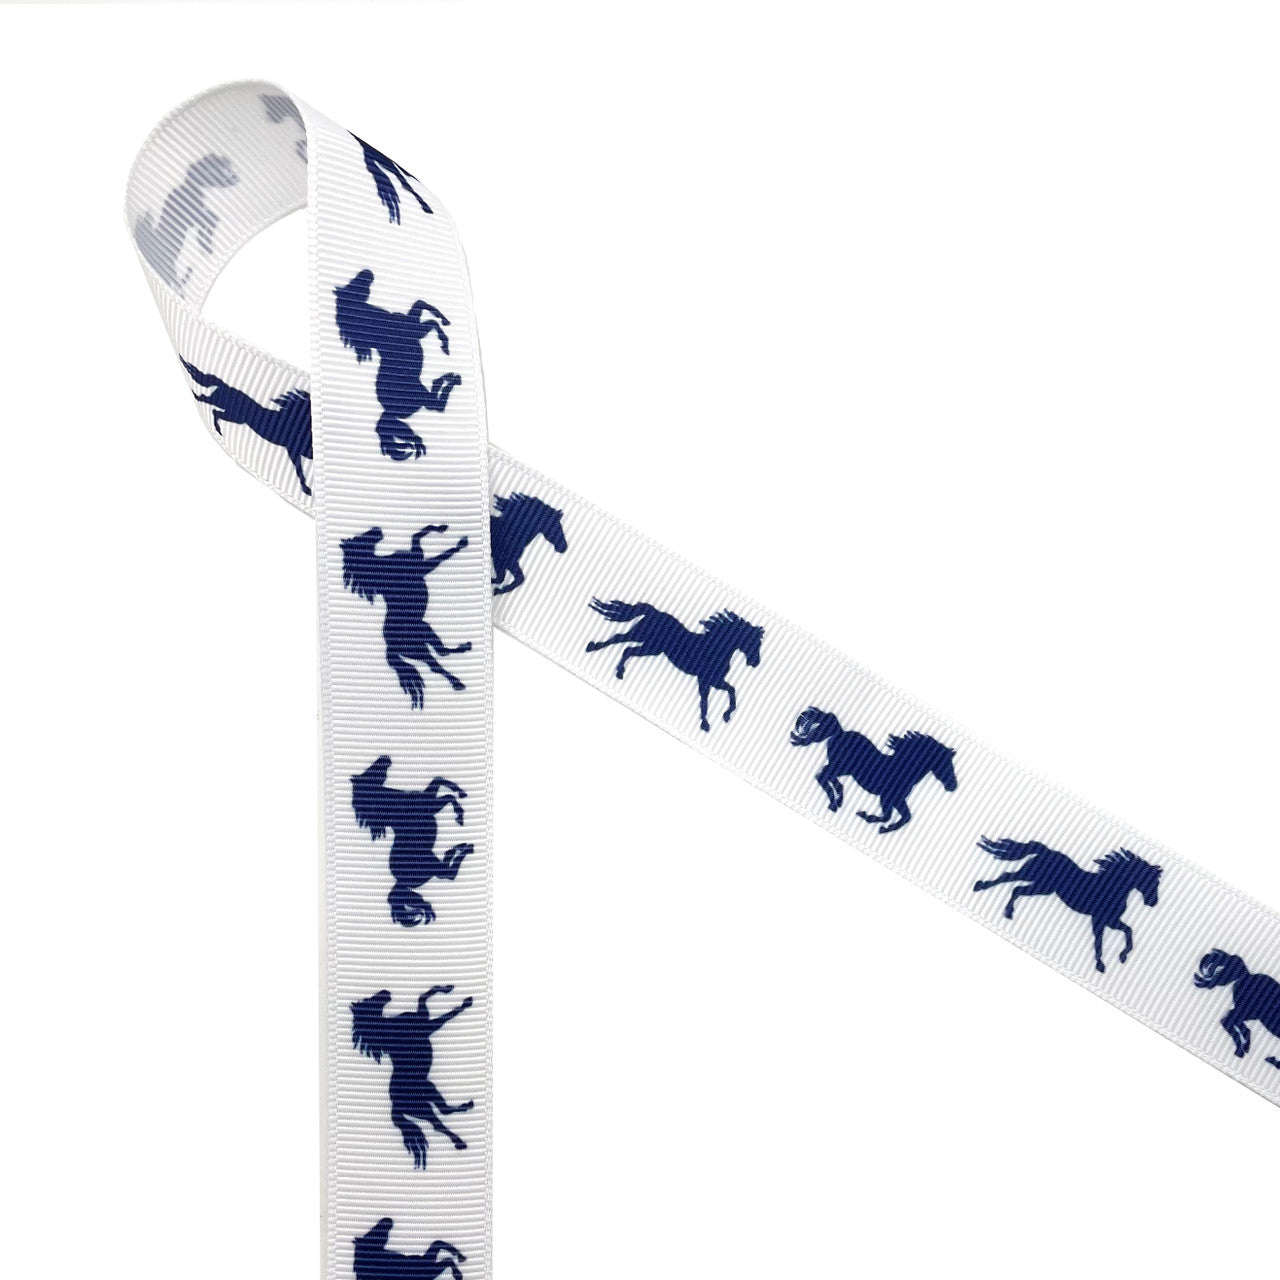 Equestrian ribbon horse running in black or navy printed on 7/8" white, pink or tan grosgrain